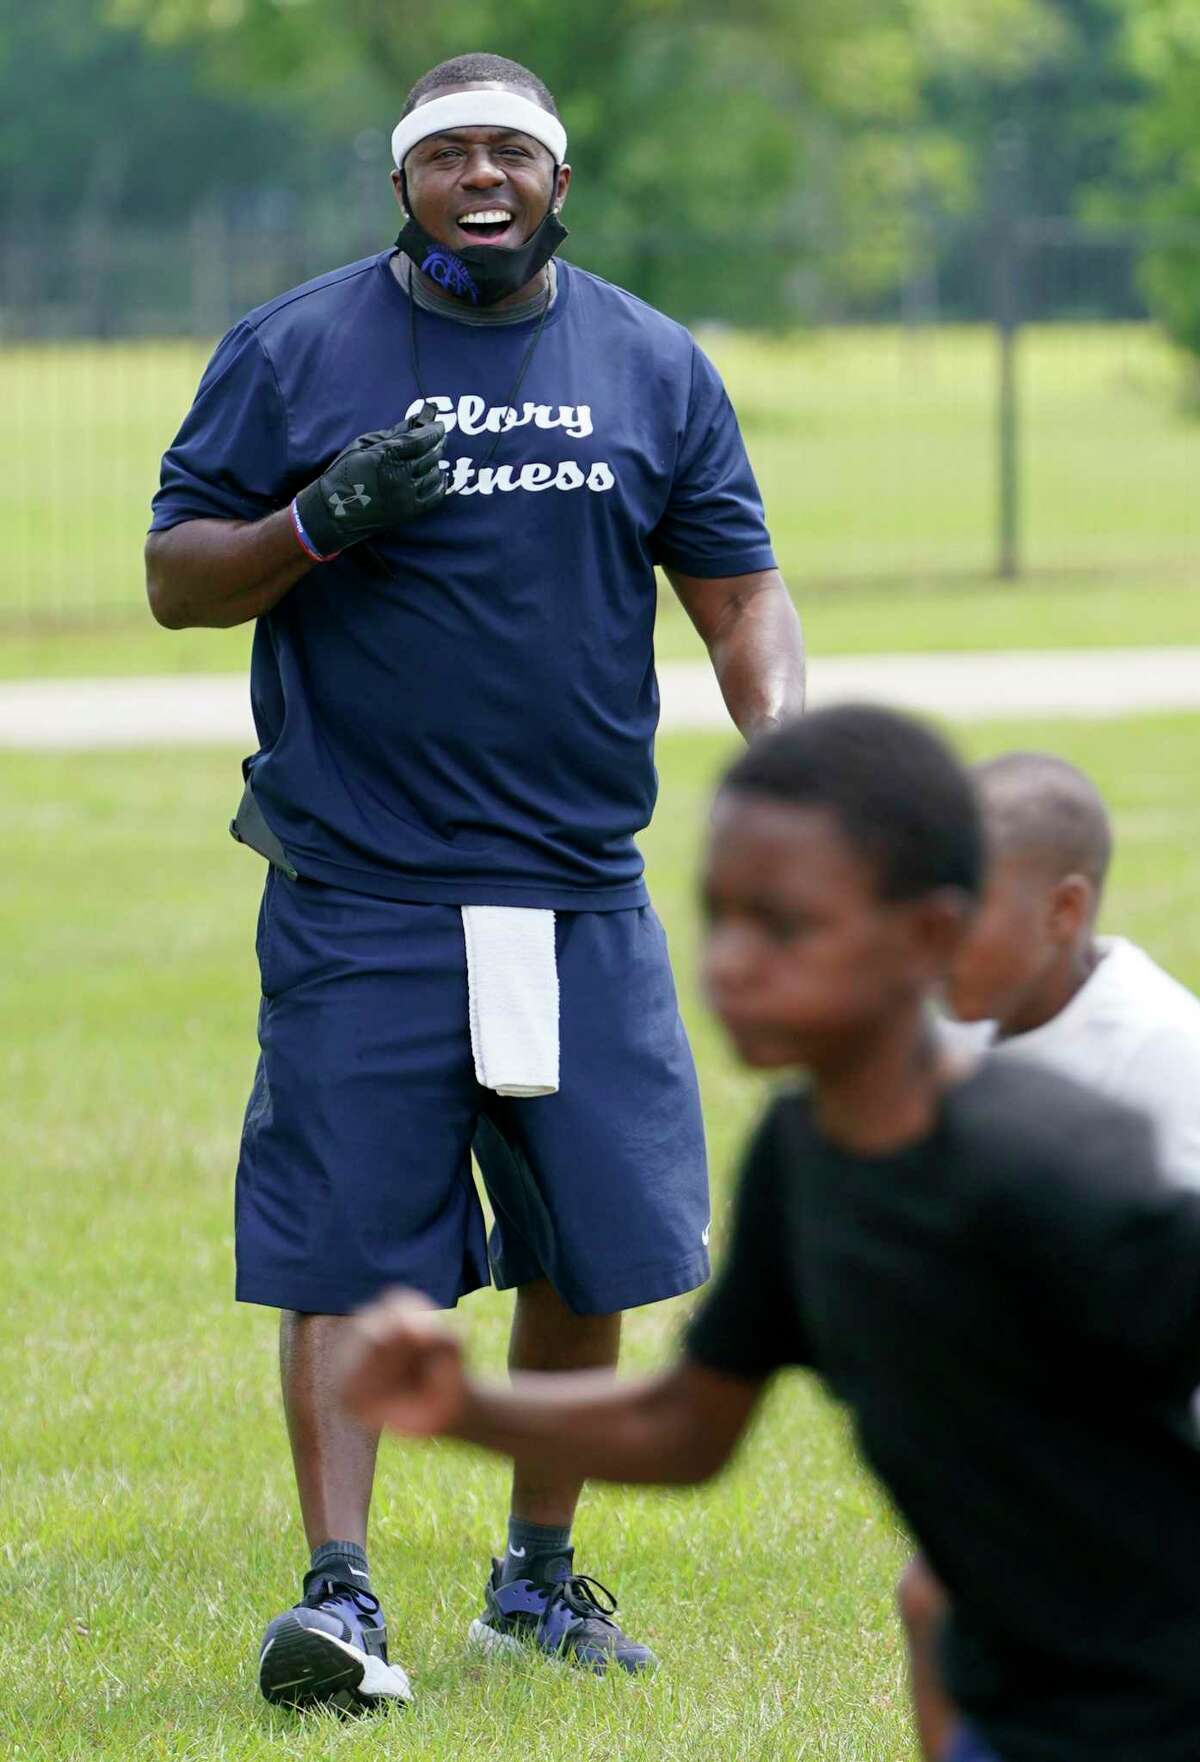 Christopher Boykins, who started the Boykins Youth Foundation that brings exercise to kids in the Houston area, leads a workout at Tom Bass Park Monday, May 4, 2020, in Houston. He has owned and operated Glory Fitness since 2006, which has been closed amid the Covid-19 pandemic.